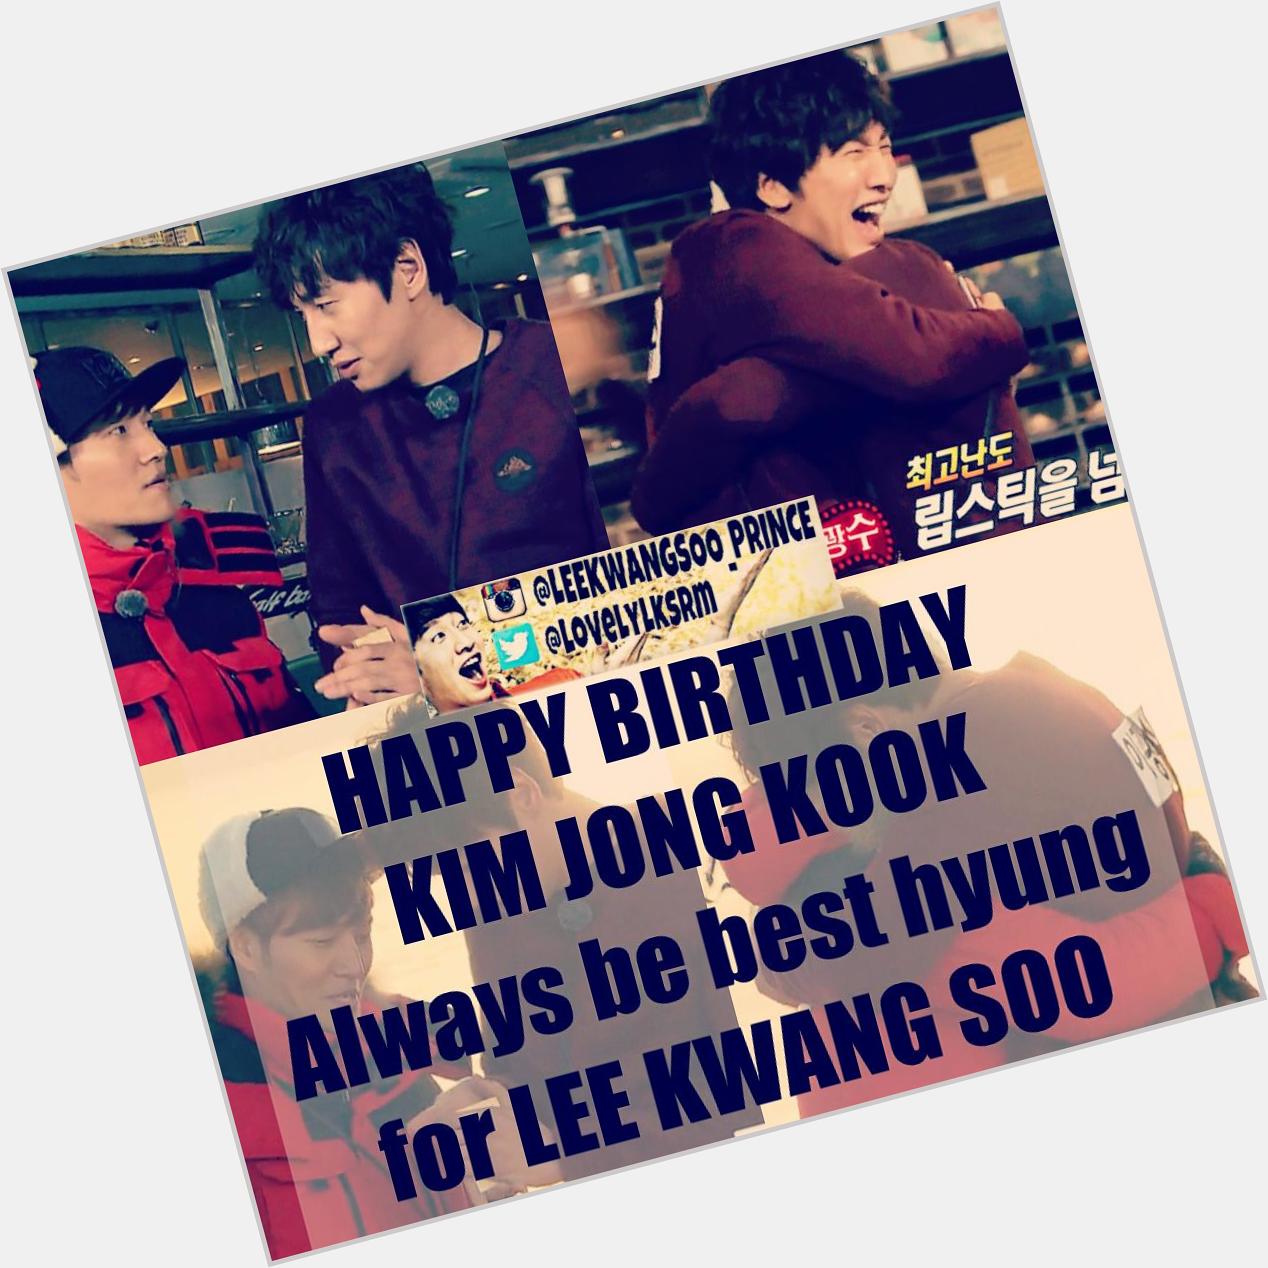 [GREETING] HAPPY BIRTHDAY for KIM JONG KOOK! Always be best Hyung for your lovely brother LEE KWANG SOO 